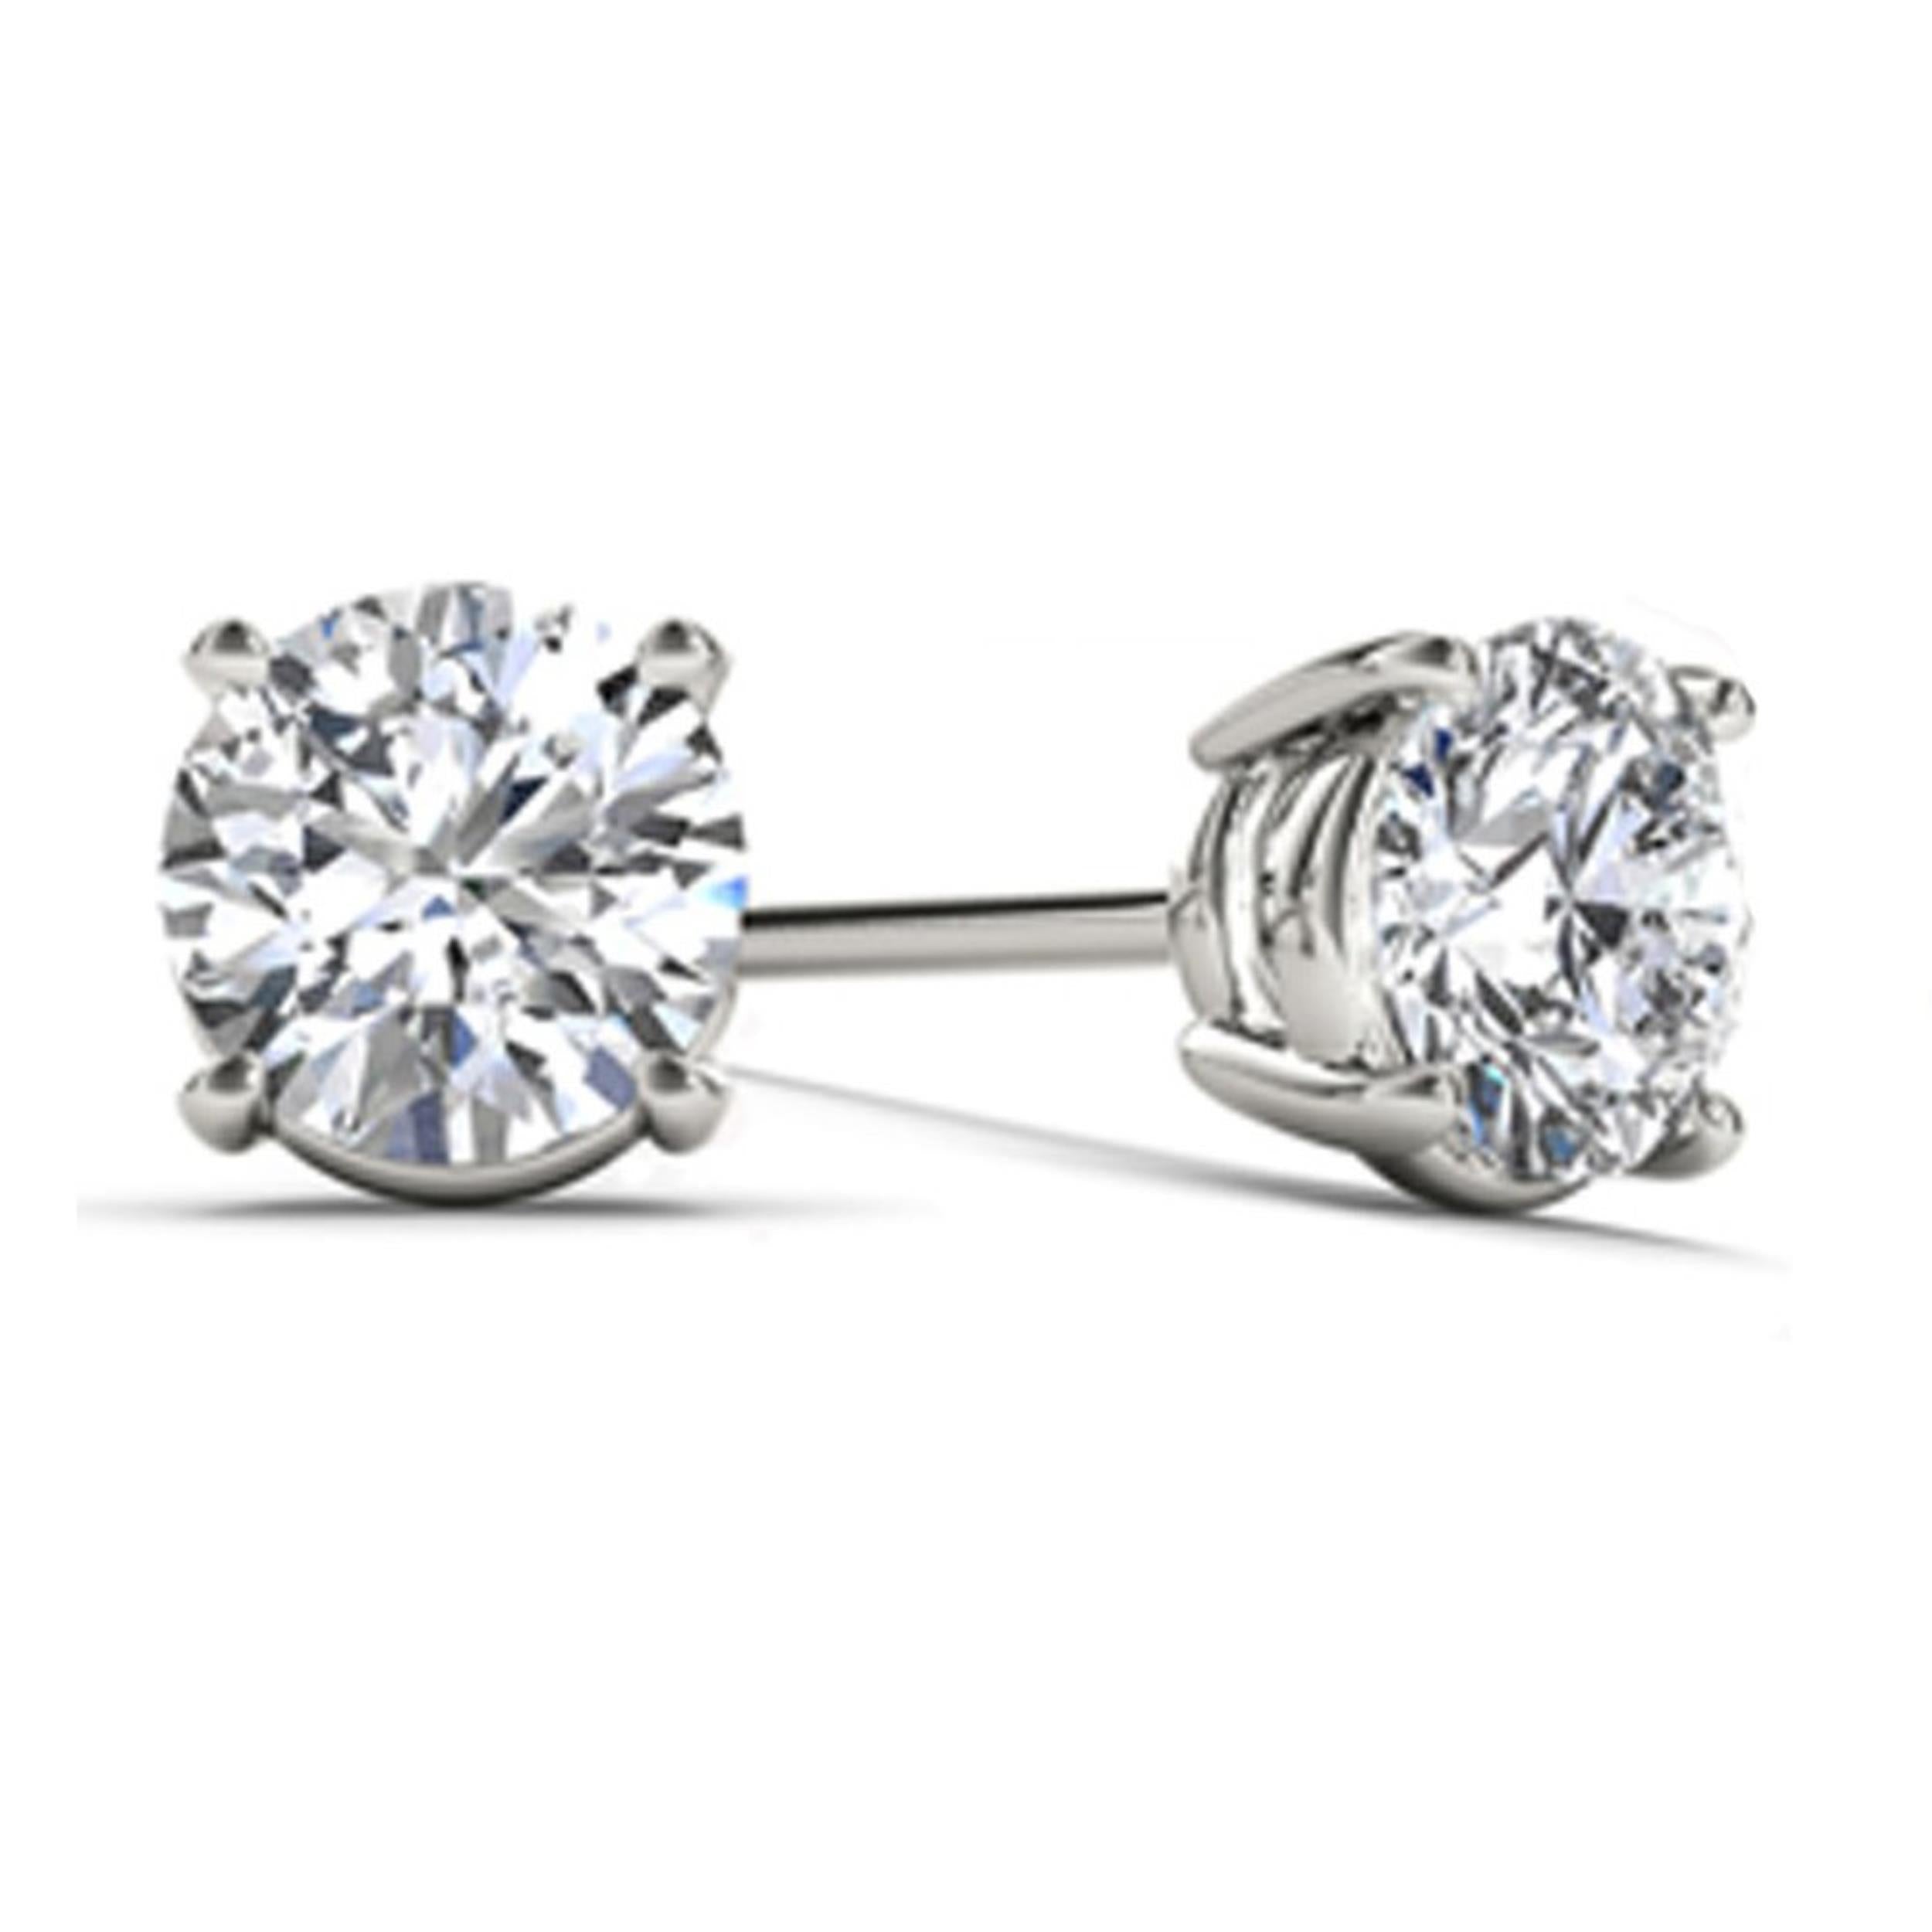 14Kt White Gold 3/8 Ct Genuine Natural Diamond Round Stud Earrings